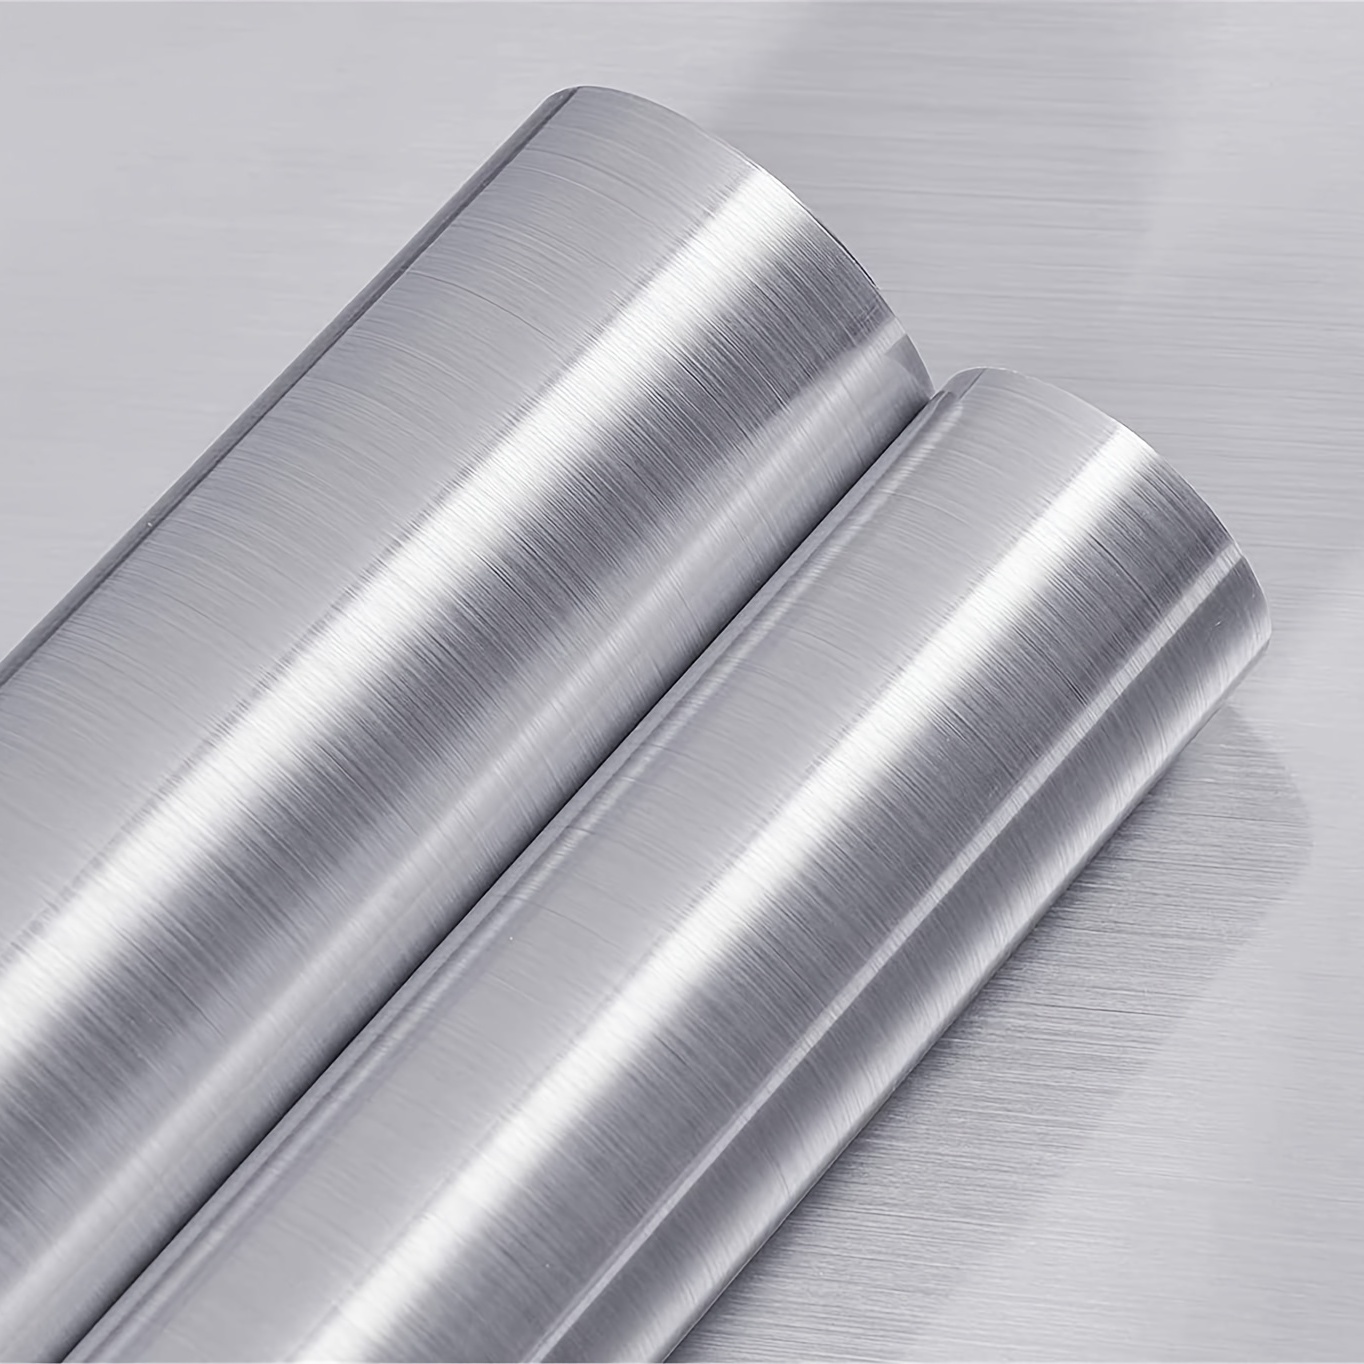 Stainless Steel Contact Paper for Appliances Metal Silver Contact Paper for Dishwasher Fridge Refrigerator Peel and Stick Backsplash Glossy